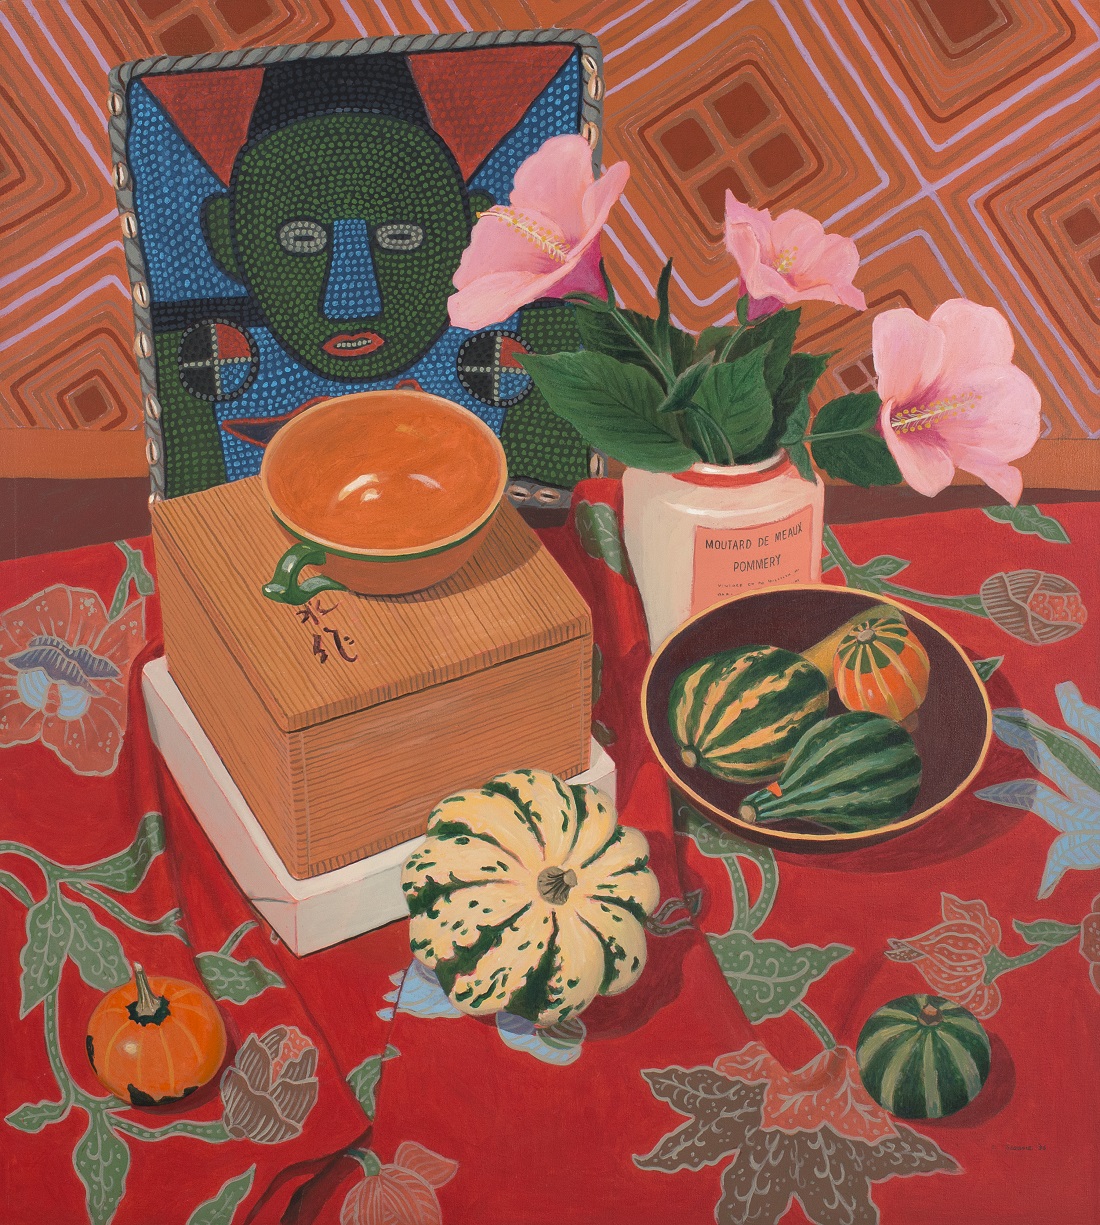 
		                					Phyllis Sloane		                																	
																											<i>Still Life with African Purse,</i>  
																																								1996, 
																																								acrylic on canvas, 
																																								54 1/8 x 48 1/8 inches 
																								
		                				